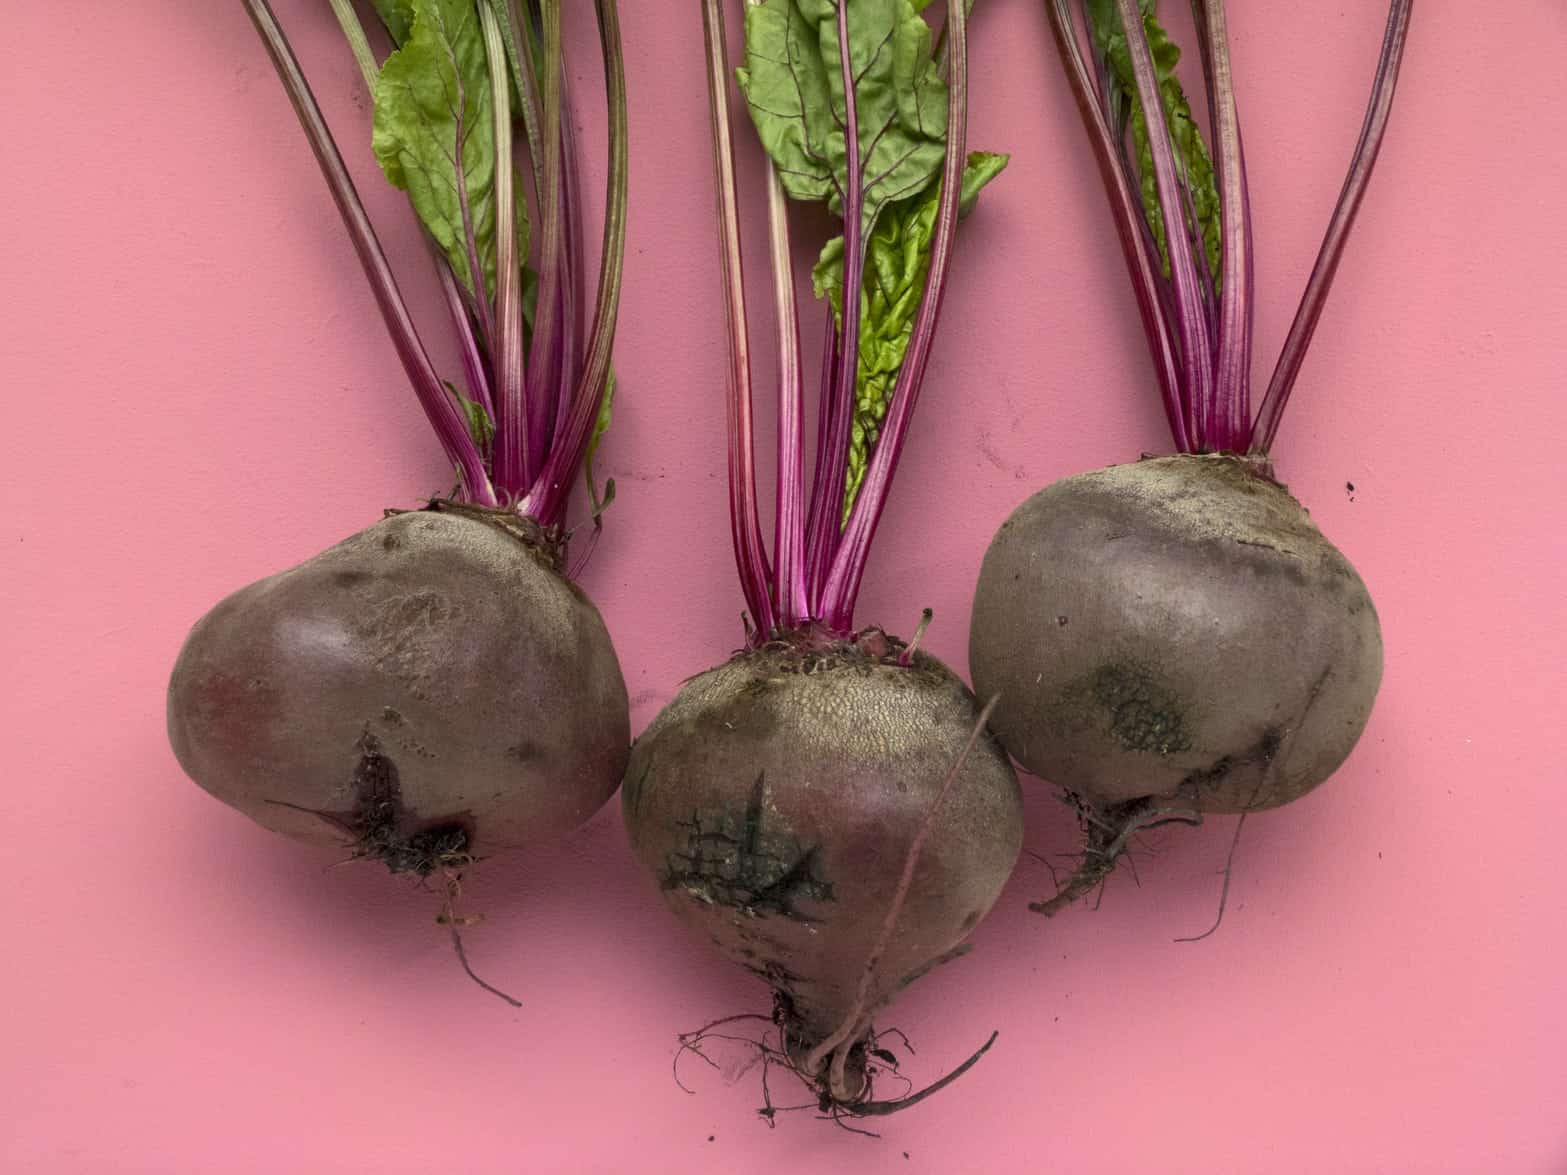 6 Health Benefits of Beetroot Powder (And How To Choose A Good One)